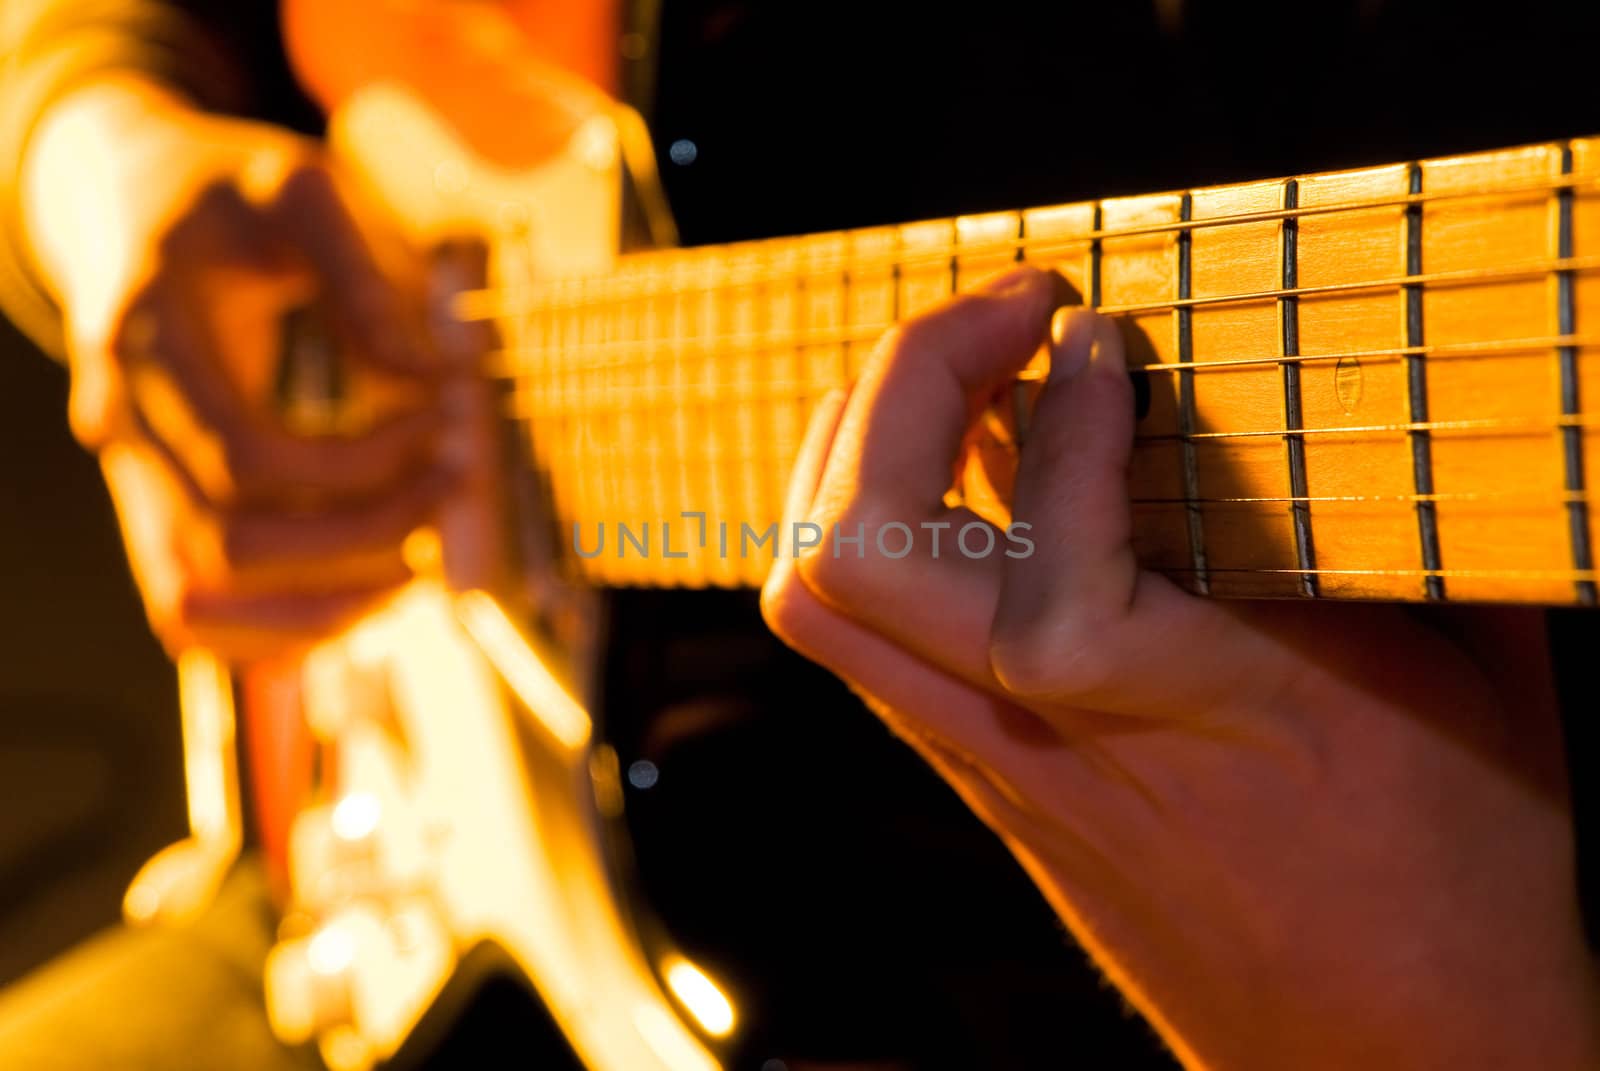 Hand playing guitar chord with shallow depth of field and orange lighting. 